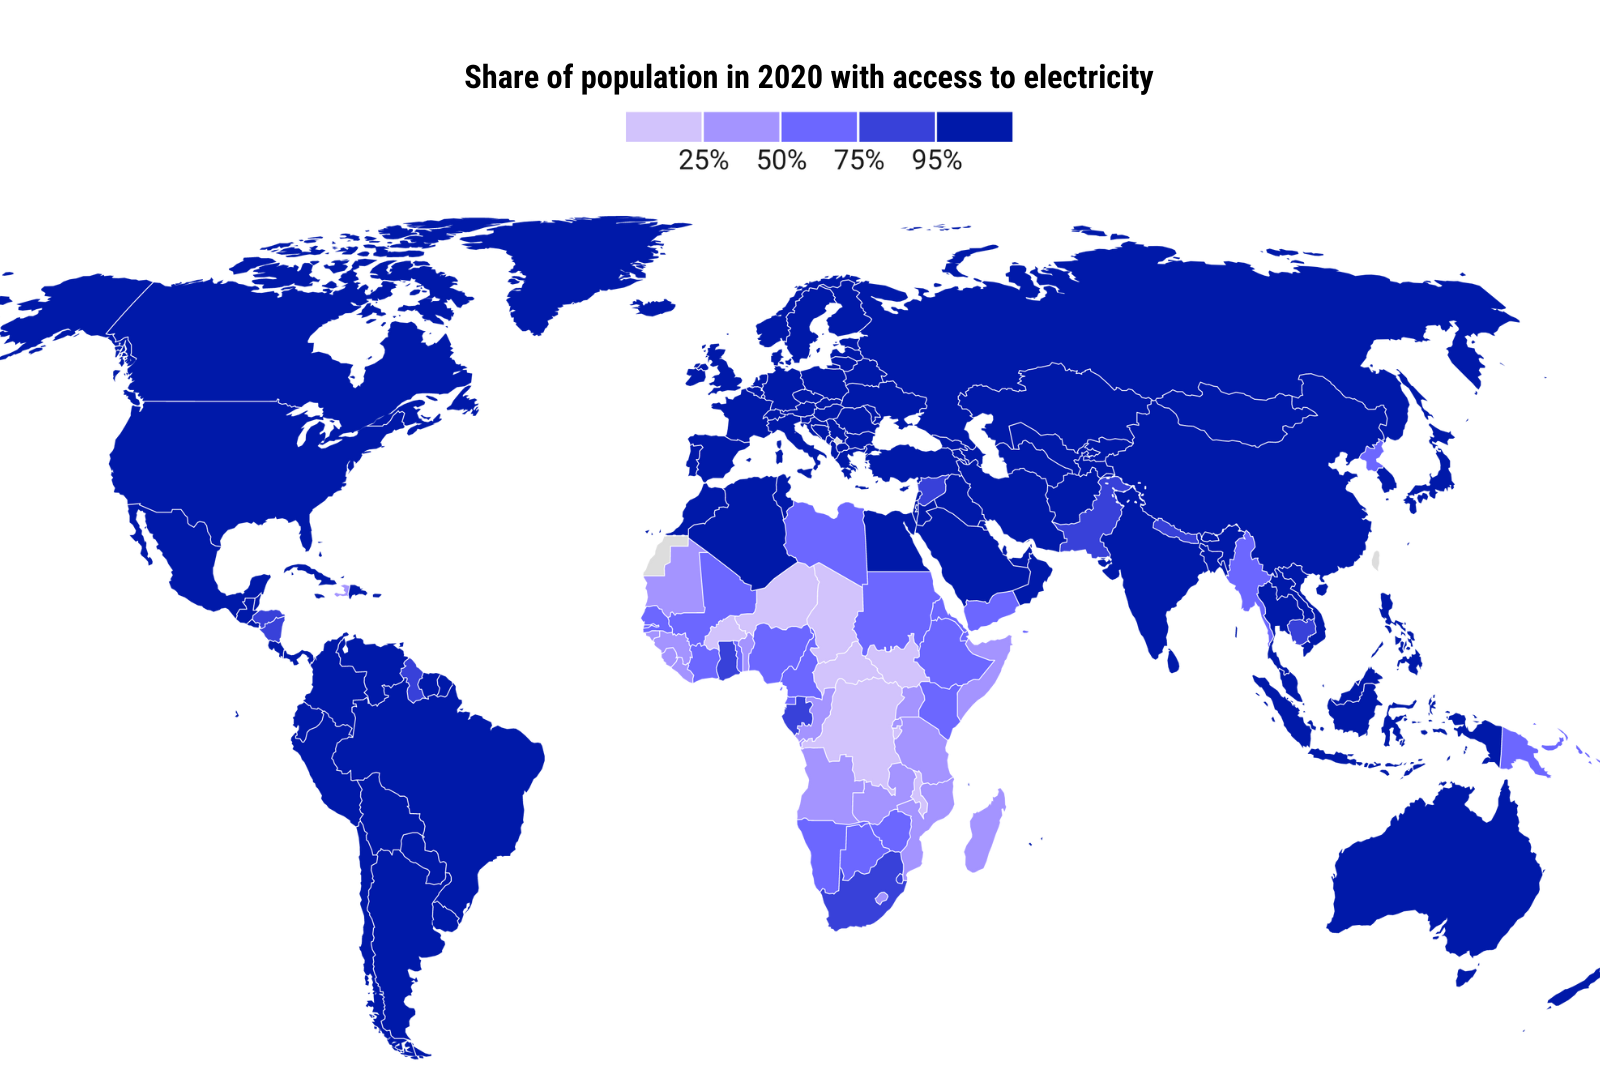 Coverage Gaps: Worldwide Access to Electricity